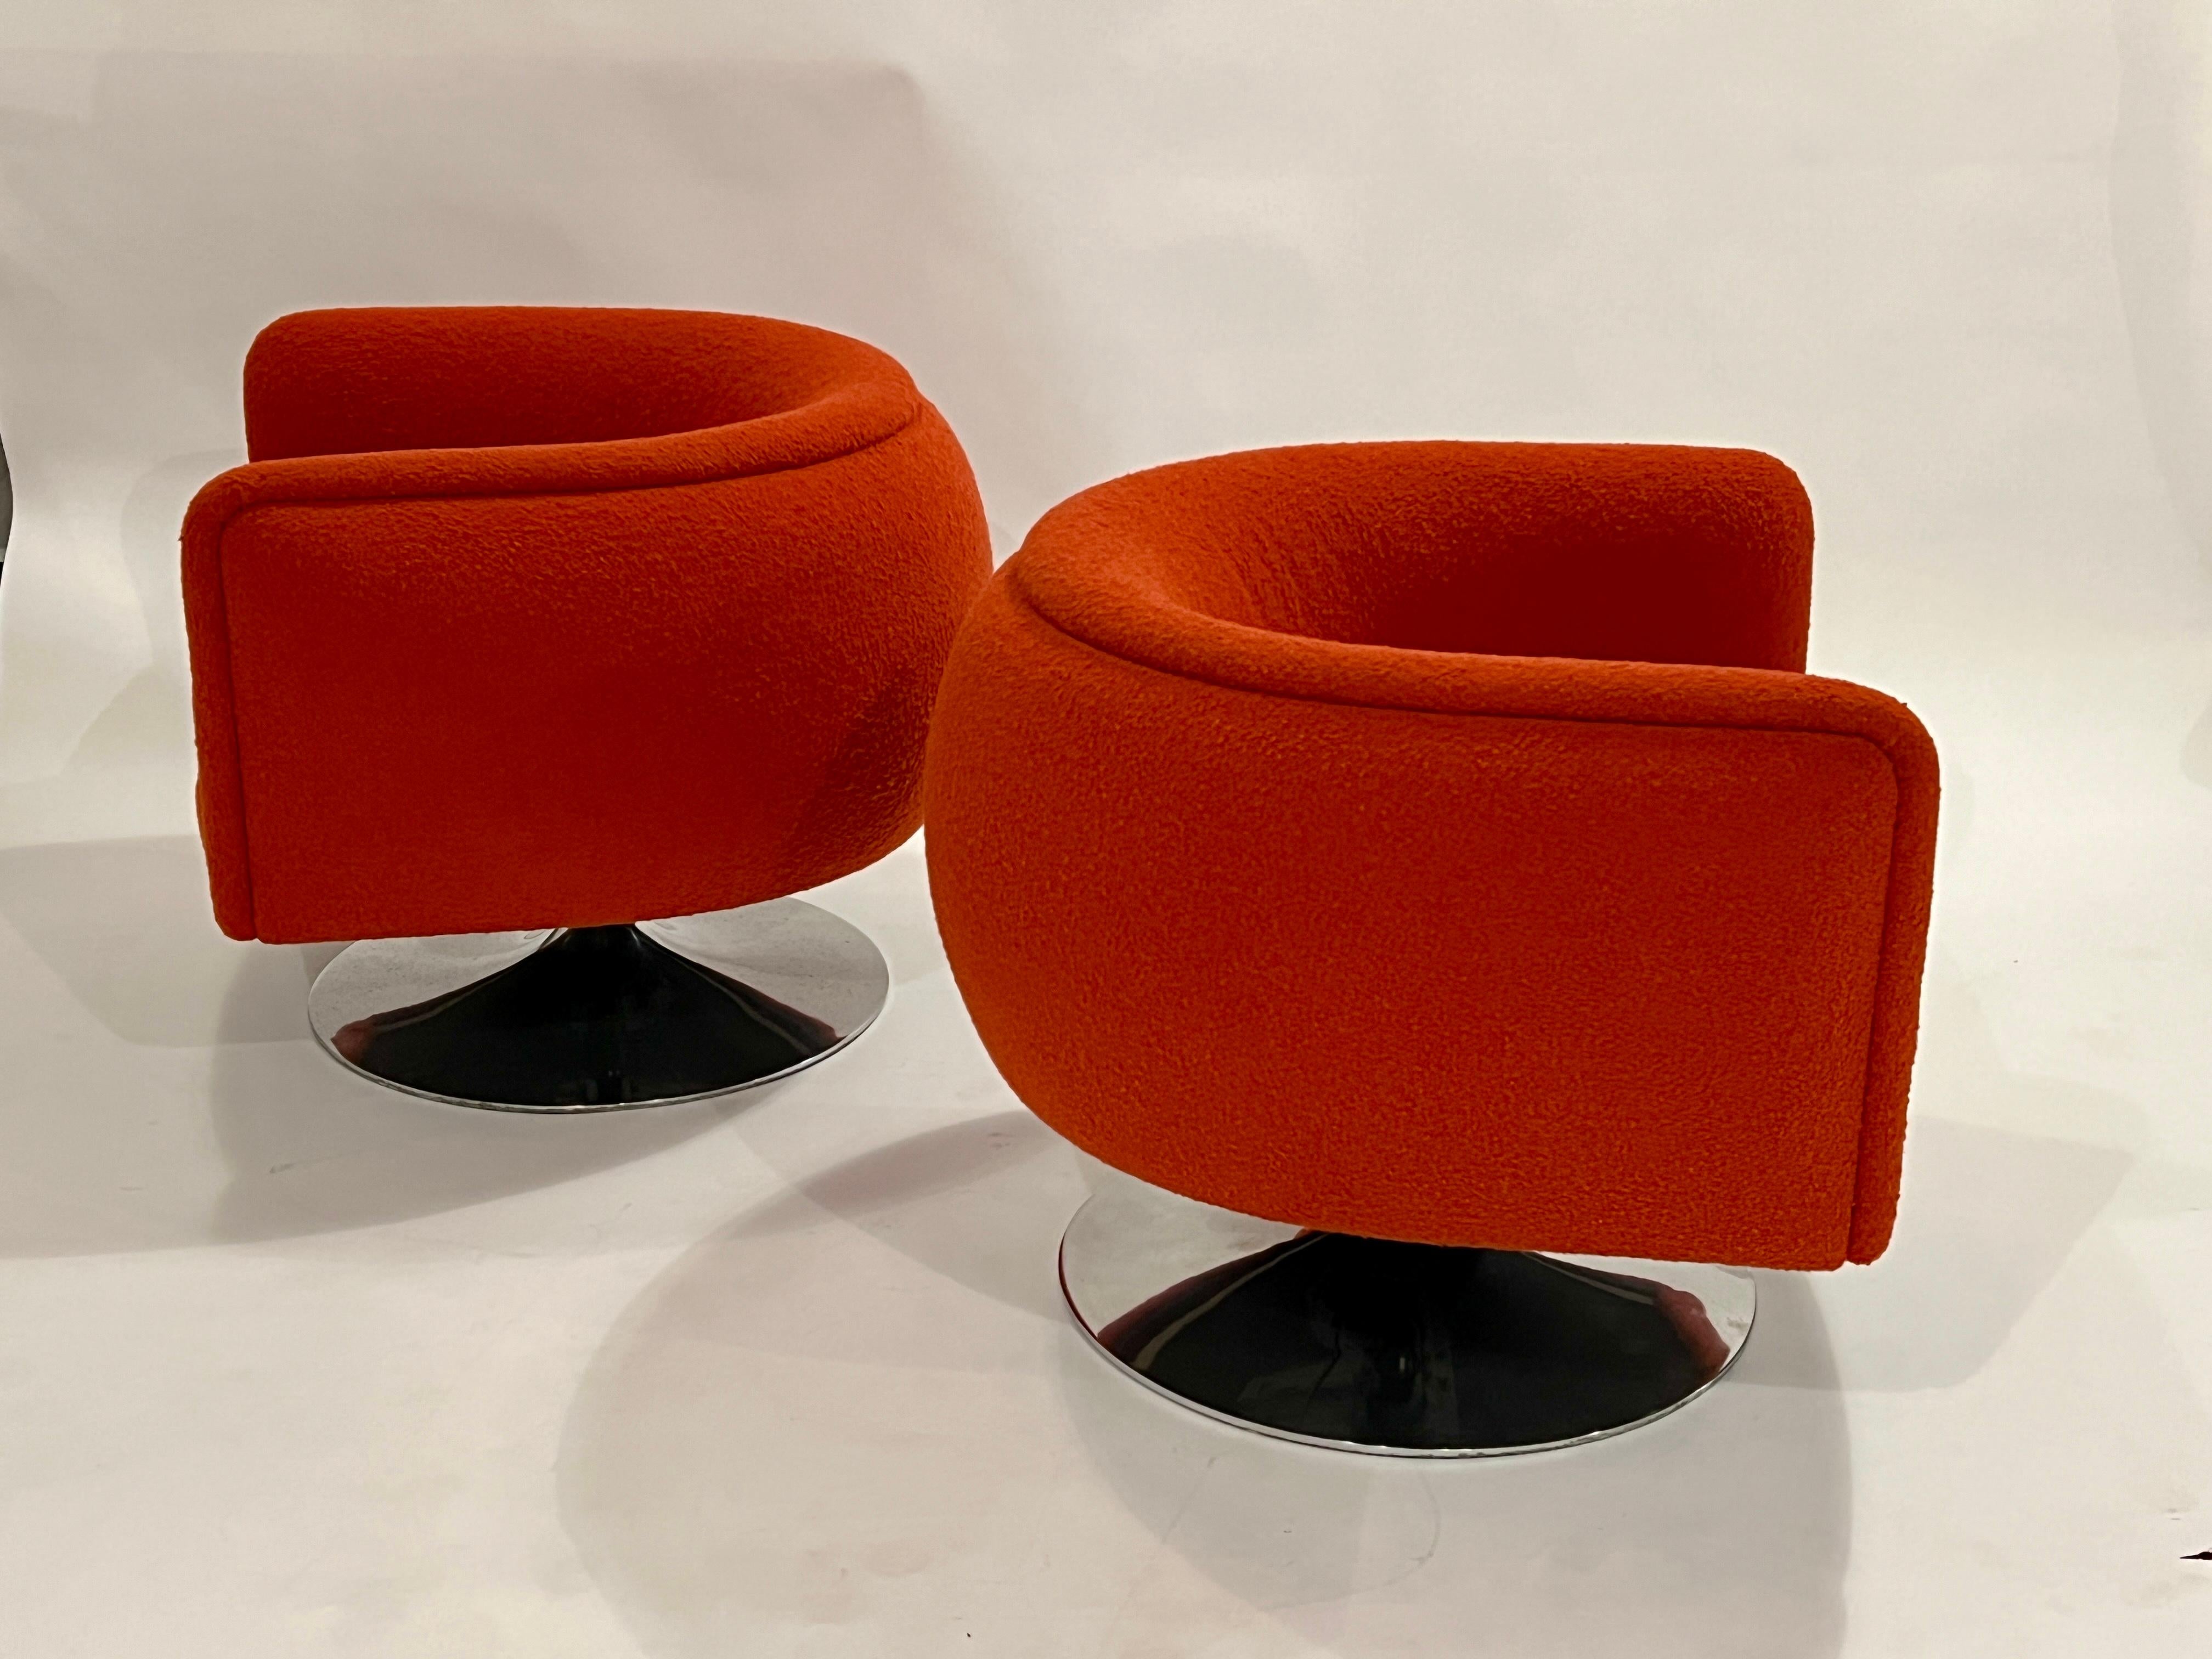 Pair of Joseph D'Urso swivel lounge chairs on polished aluminum chrome bases in all original red boucle fabric and adjustable seats. Measurements with adjustable seat height variations:

Chair: 32